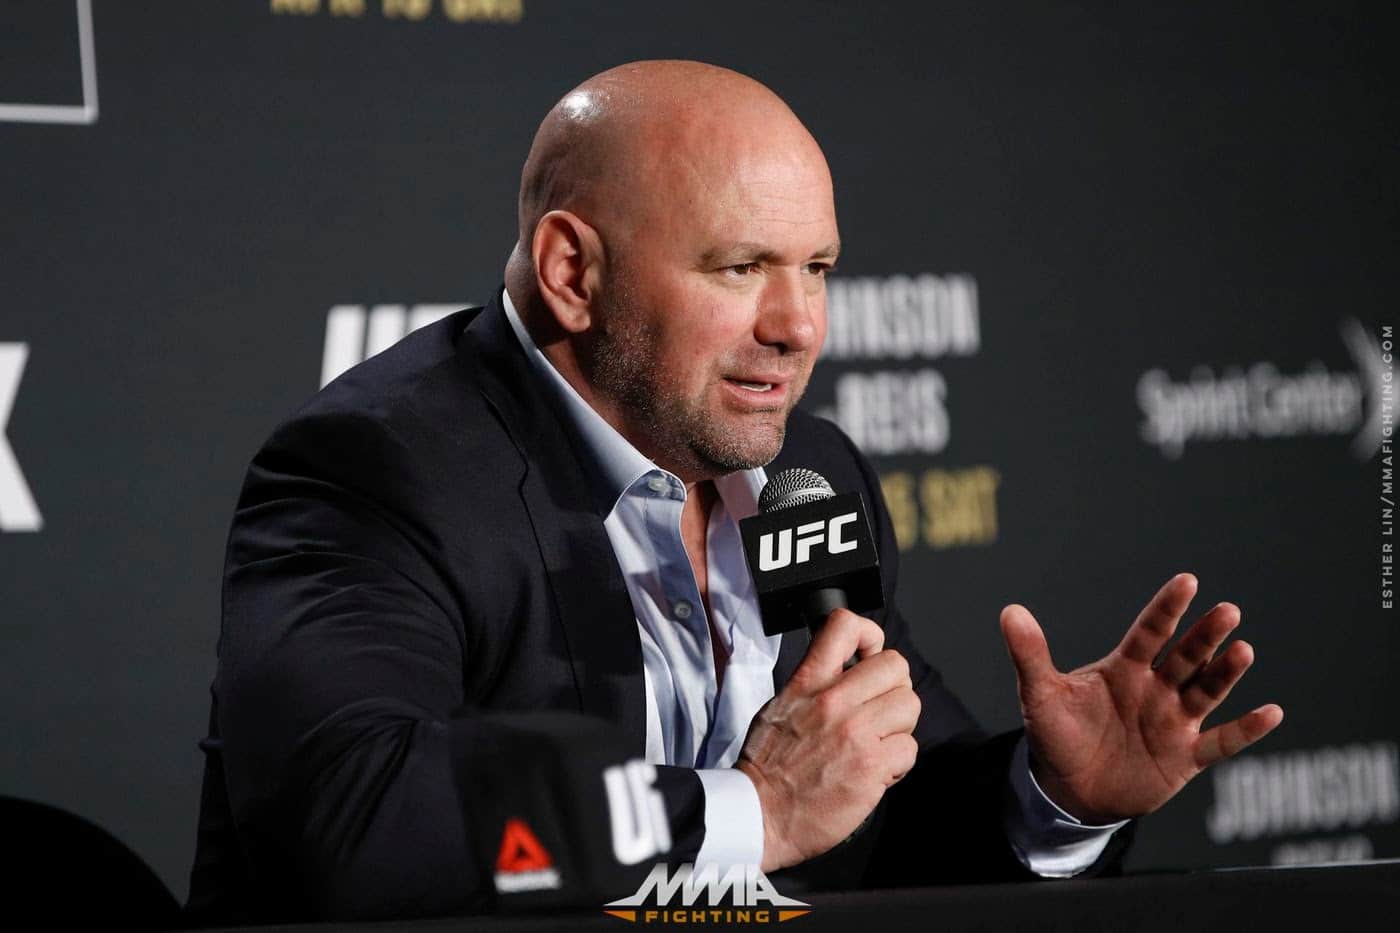 UFC President: Usman On His Way To Becoming Greatest Of All Time